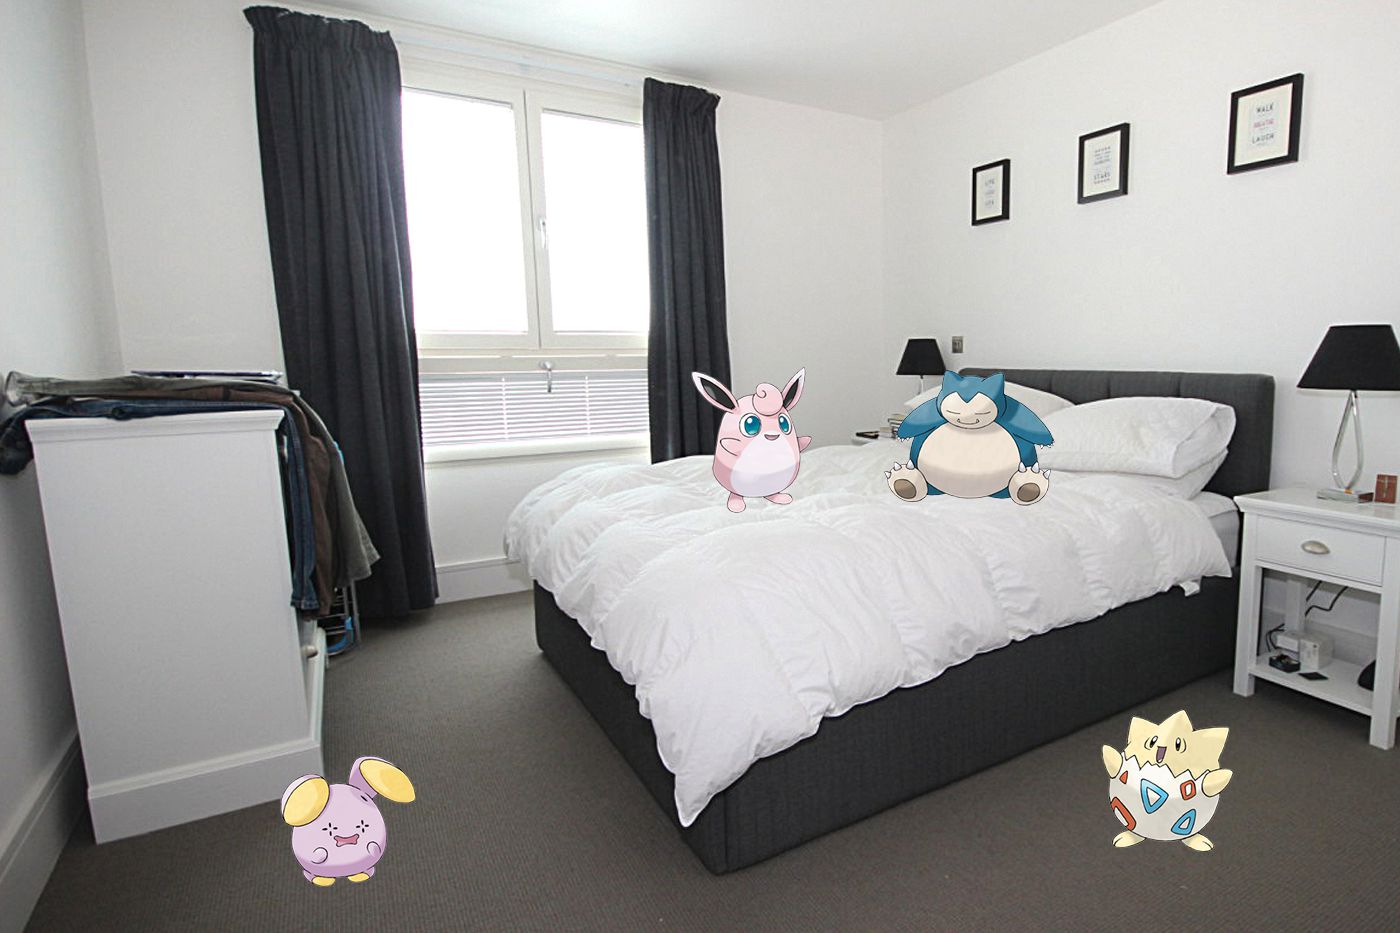 Wigglytuff thinks the bed is too lumpy